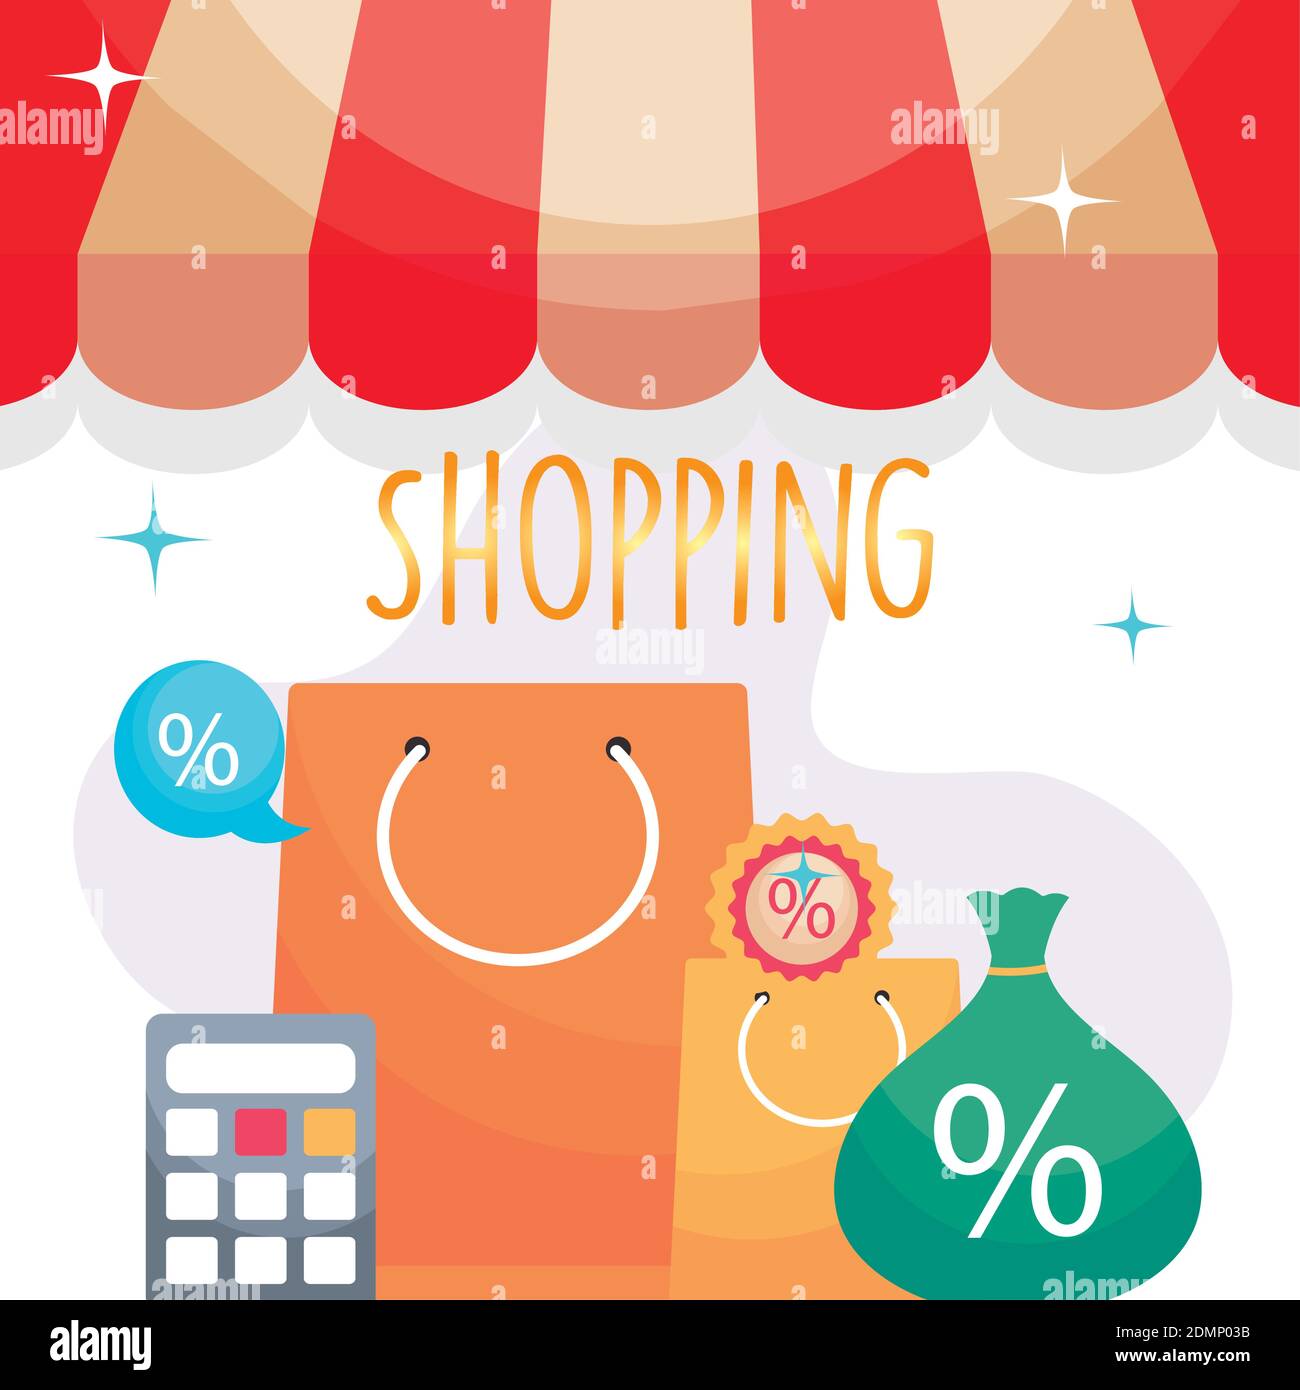 shopping bags and calculator design of commerce and market theme Vector illustration Stock Vector